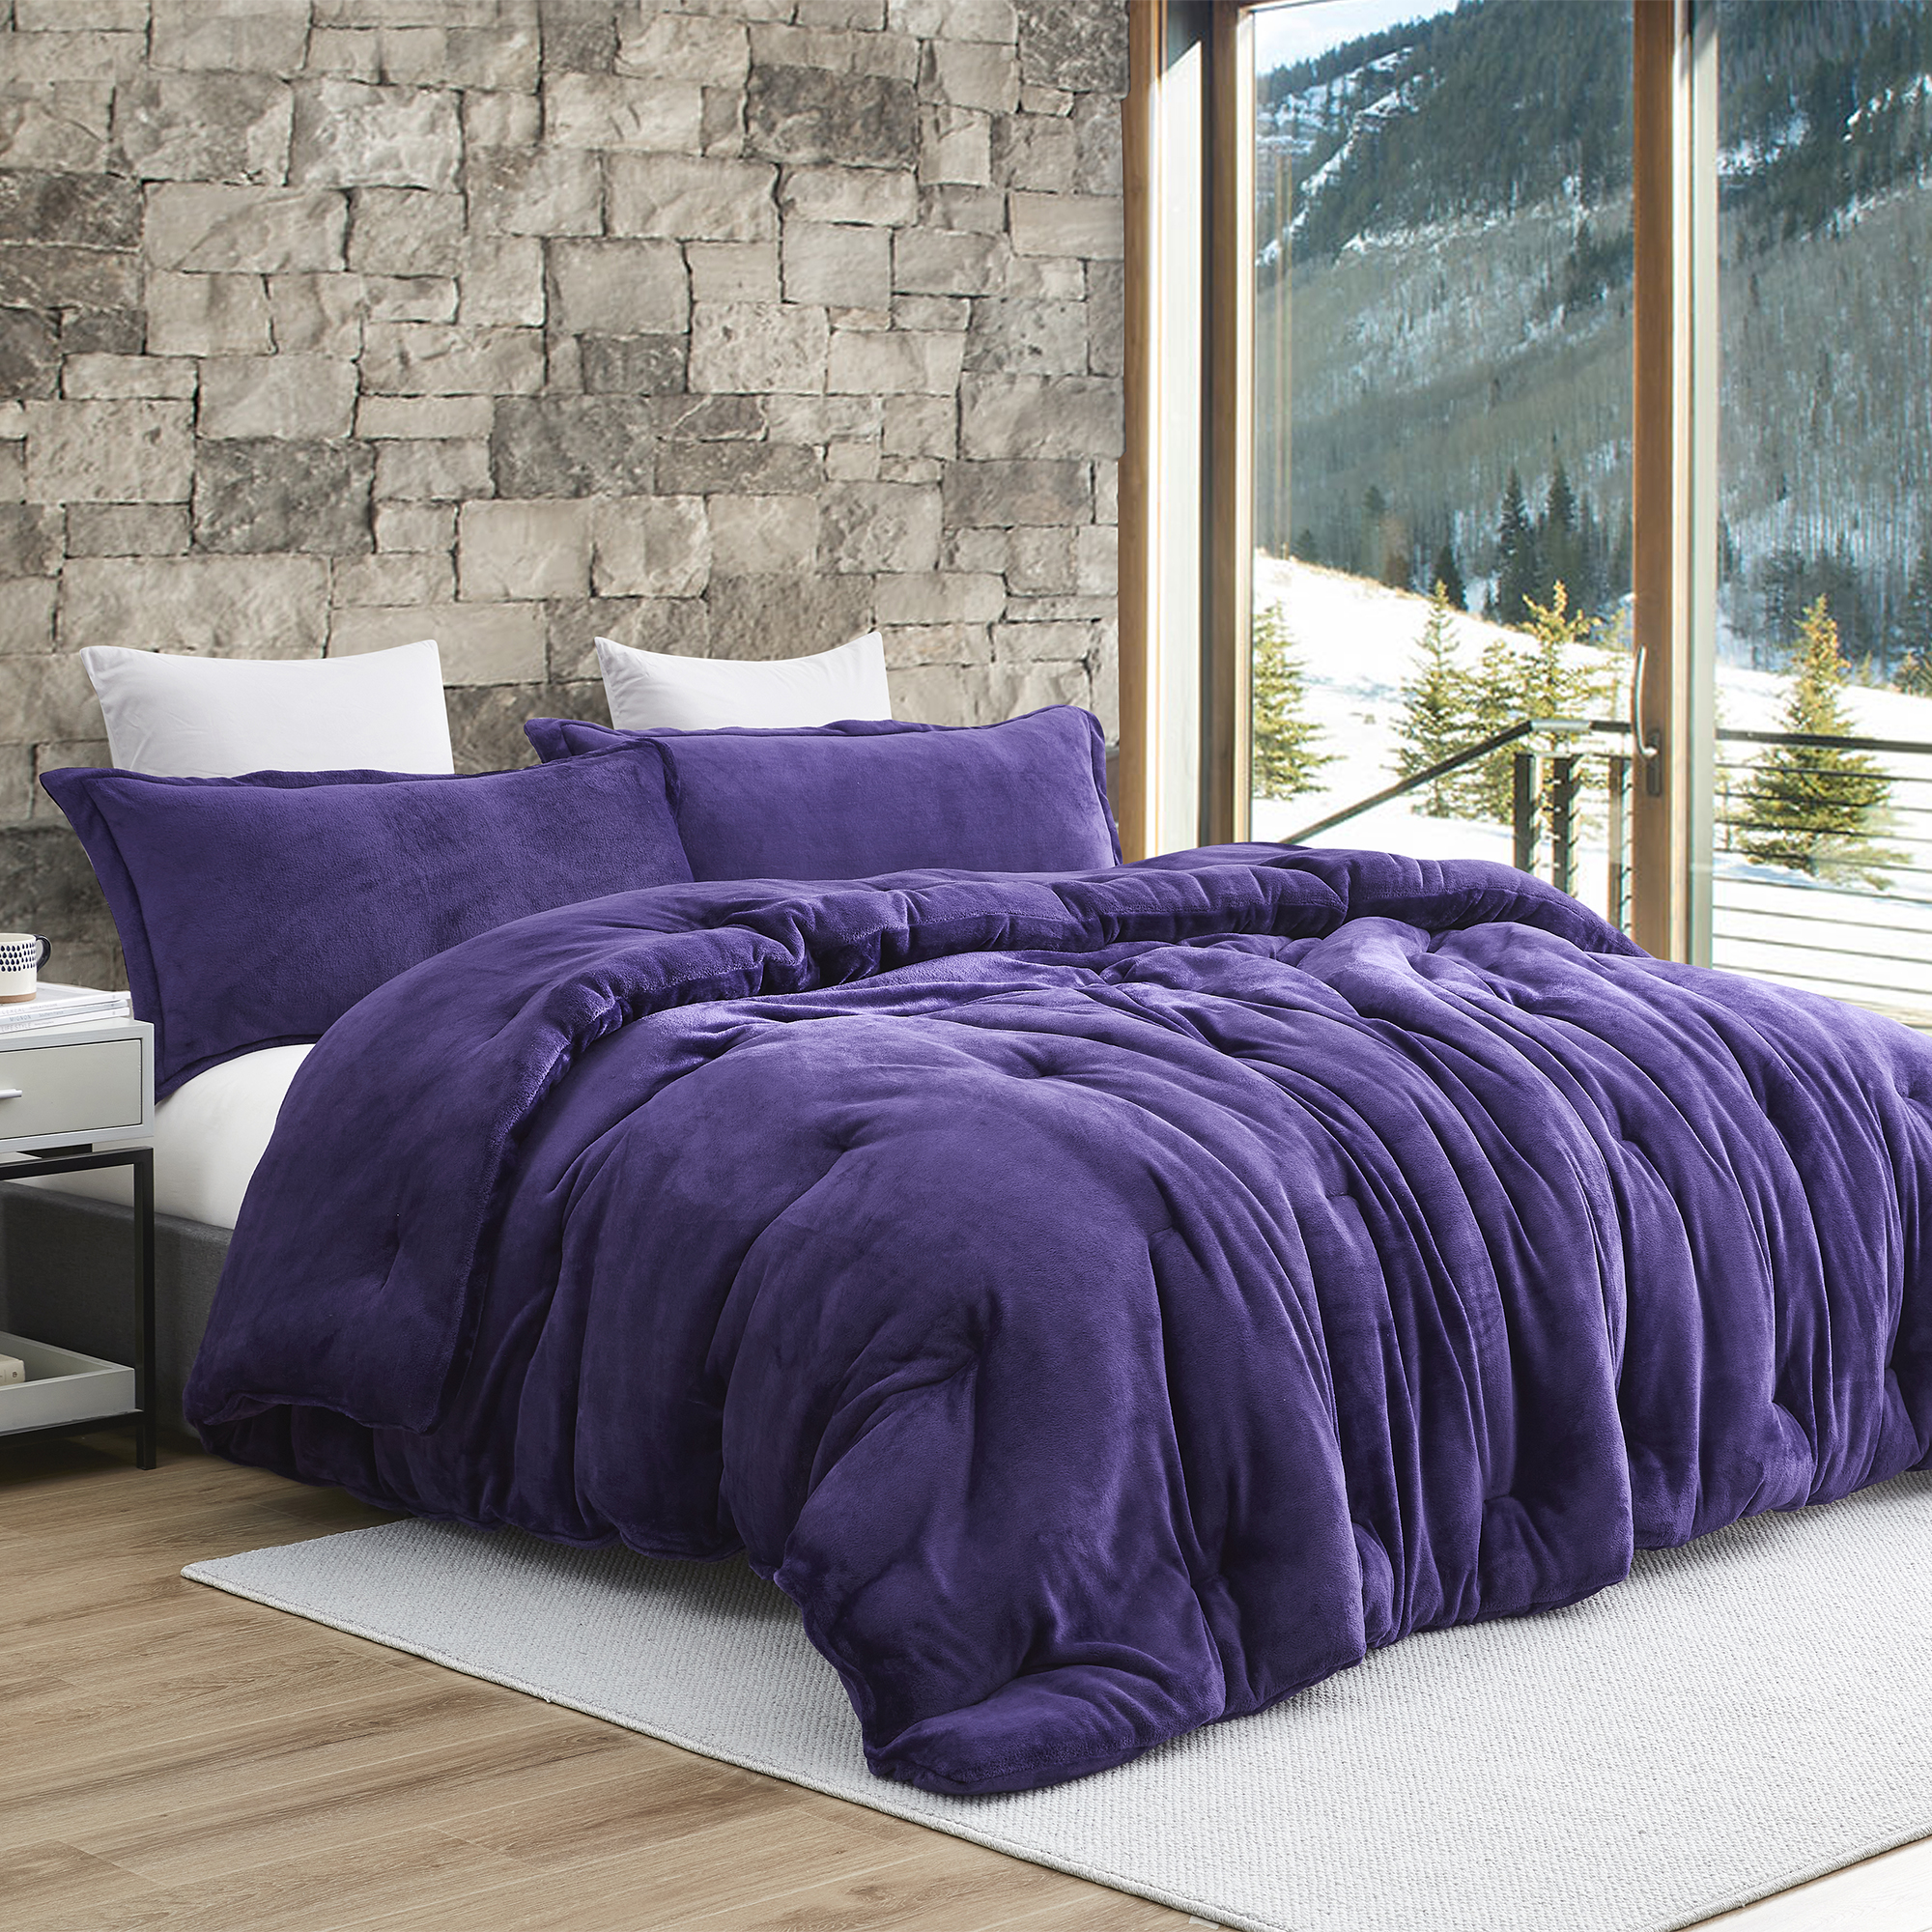 Thicker Than Thick - Coma Inducer® Oversized Comforter - Standard Plush Filling - Parachute Purple